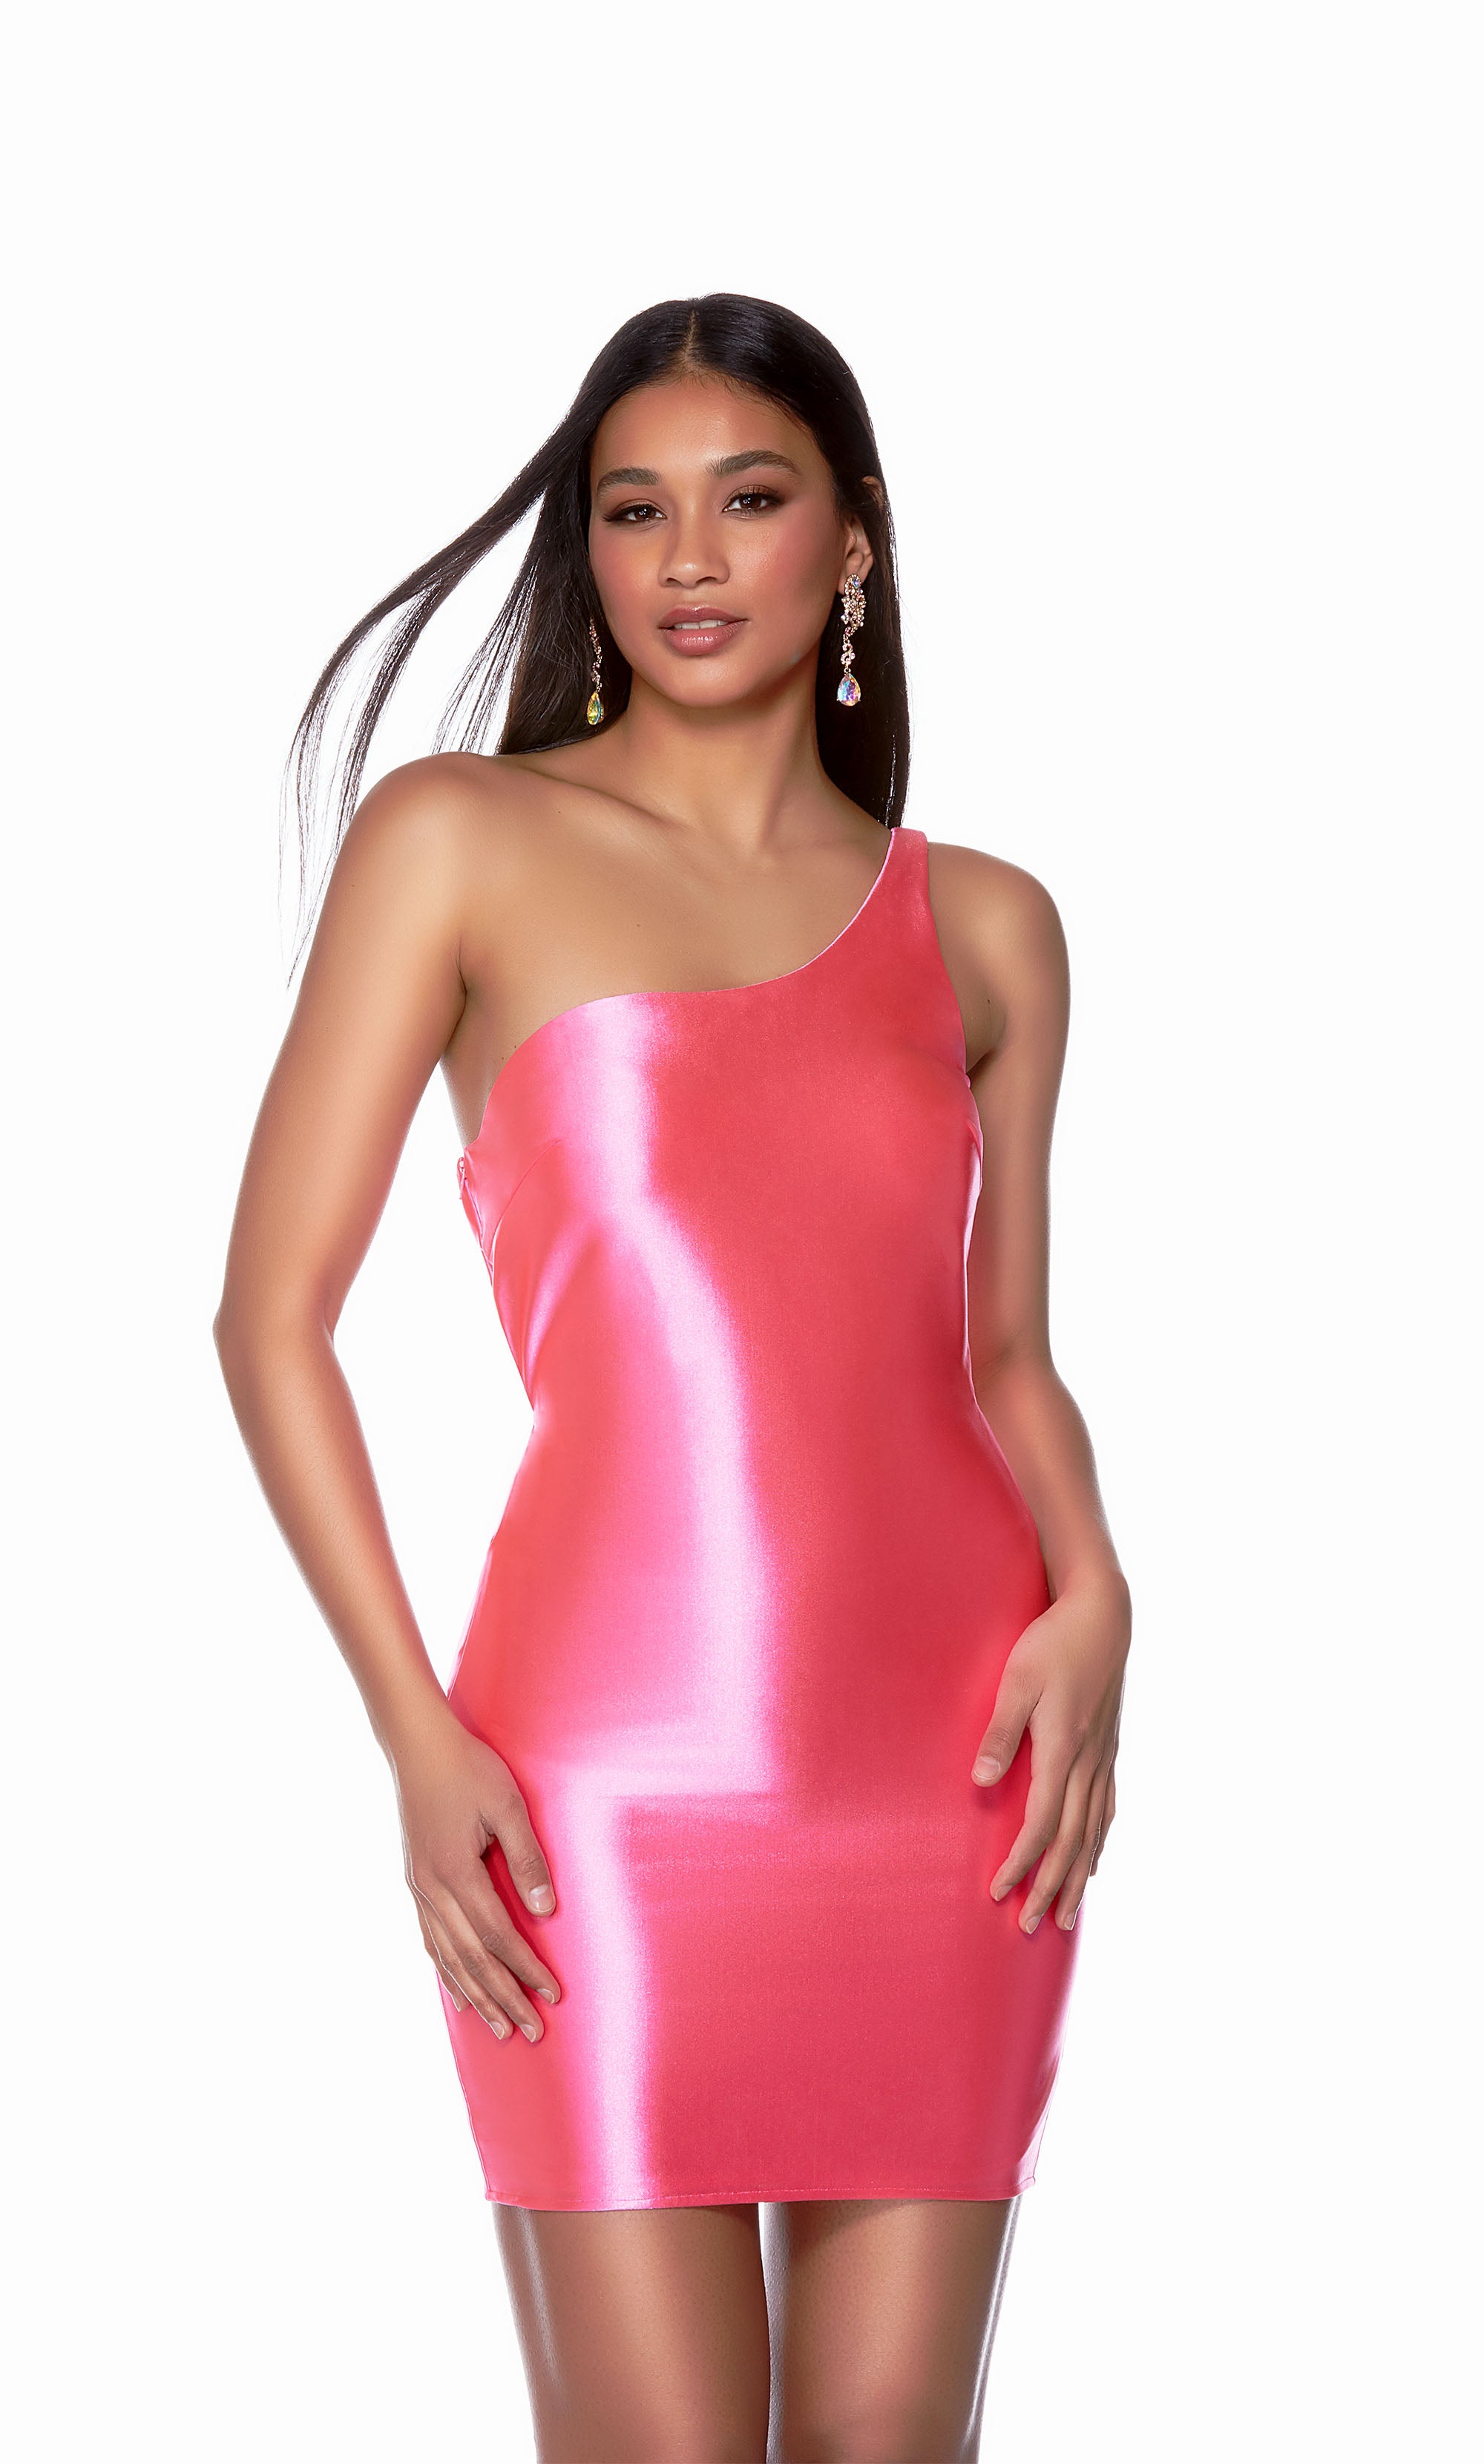 A chic, one-shoulder cocktail dress in a bold shade of shocking pink, designed with a sleek, fitted silhouette.